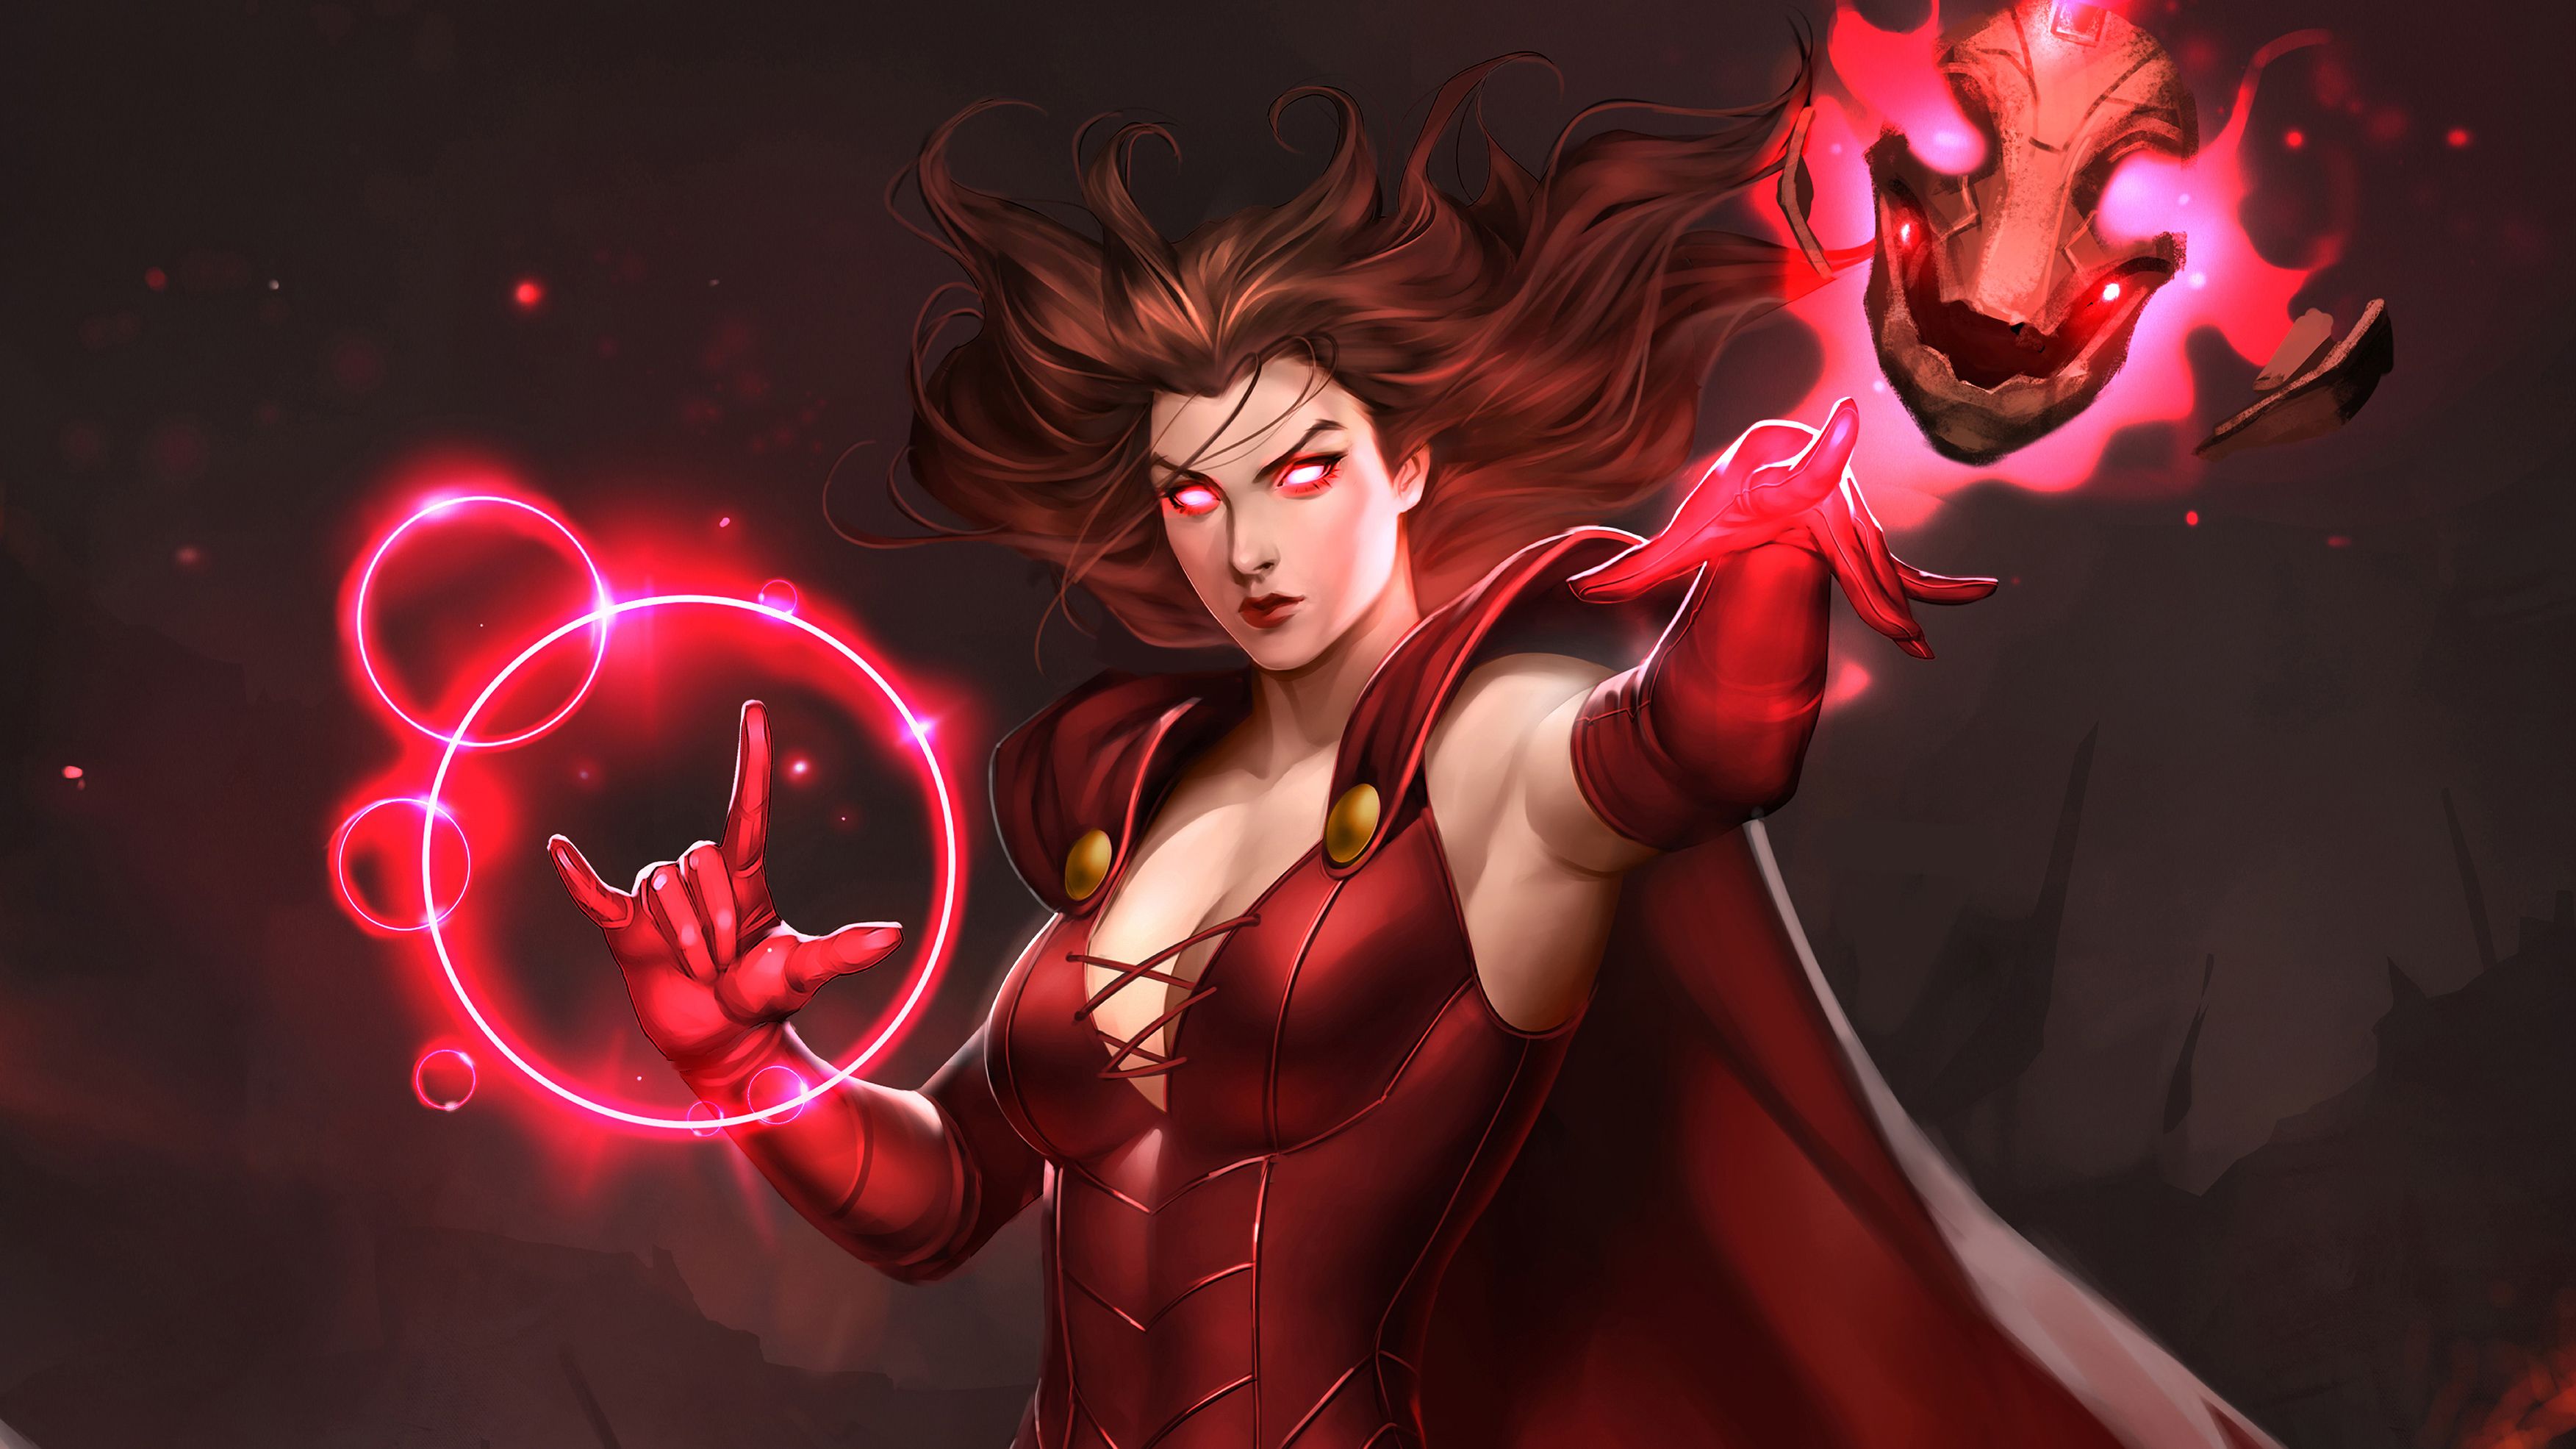 Wallpaper 4k The Scarlet Witch In The Multiverse Of Madness 4k Wallpaper